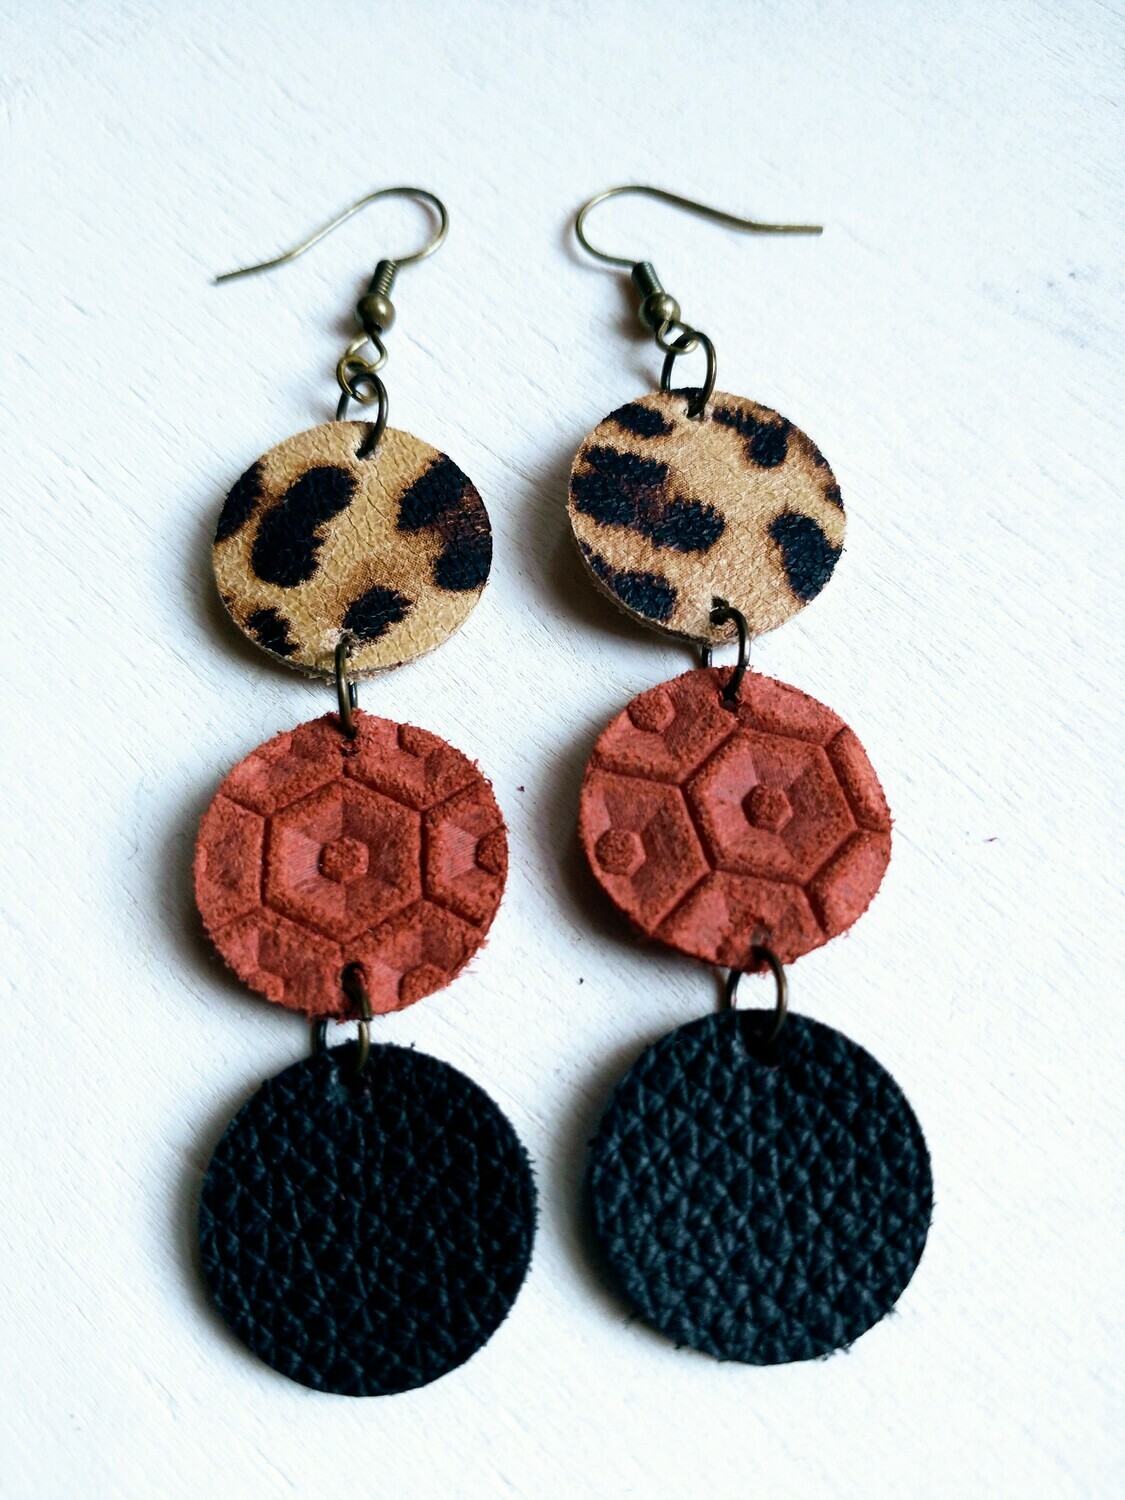 Was $20 - Now $8 (Animal Print, Rust Cork, and Black Leather Circle Stack)